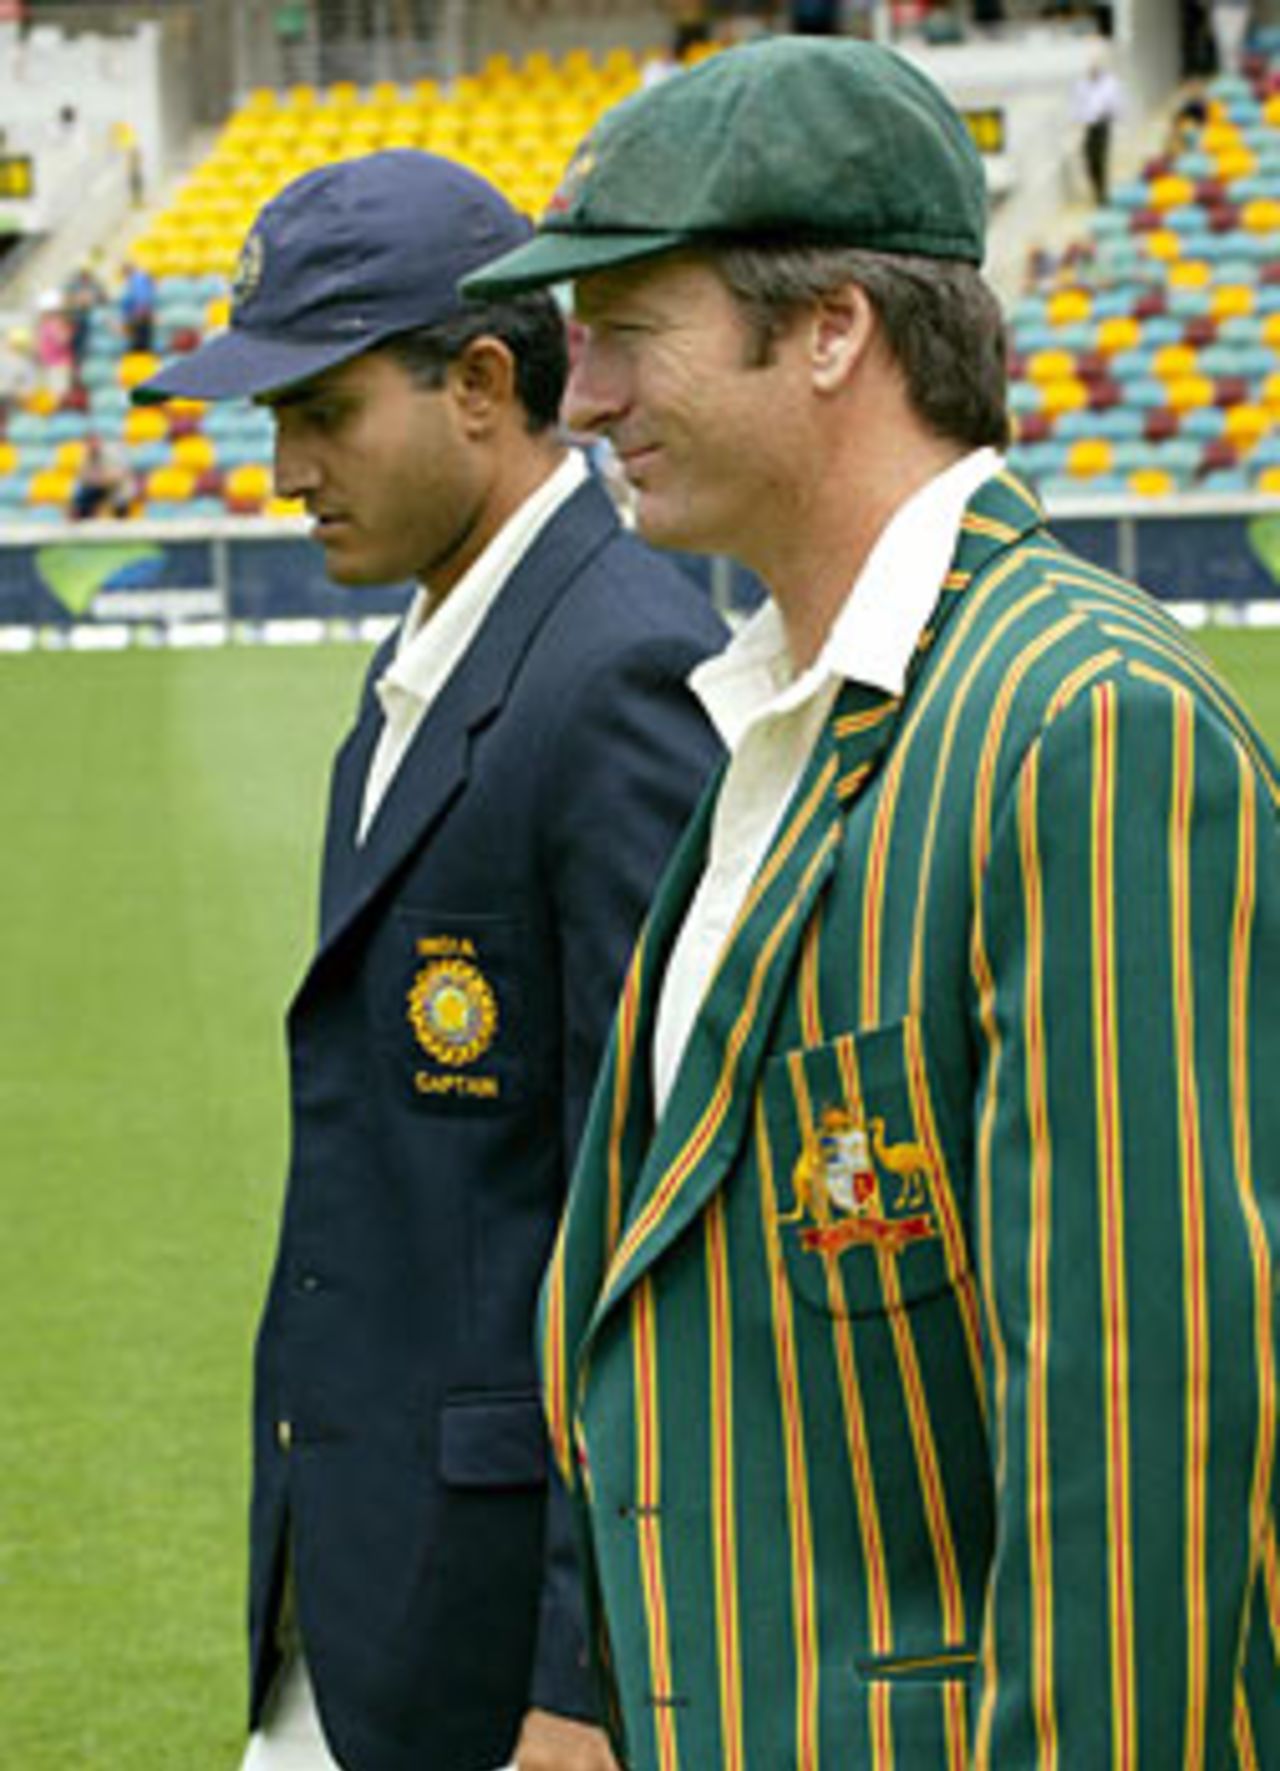 Steve Waugh and Sourav Ganguly make their way out for the toss , Australia v India, Brisbane, 1st Test, December 4 2003